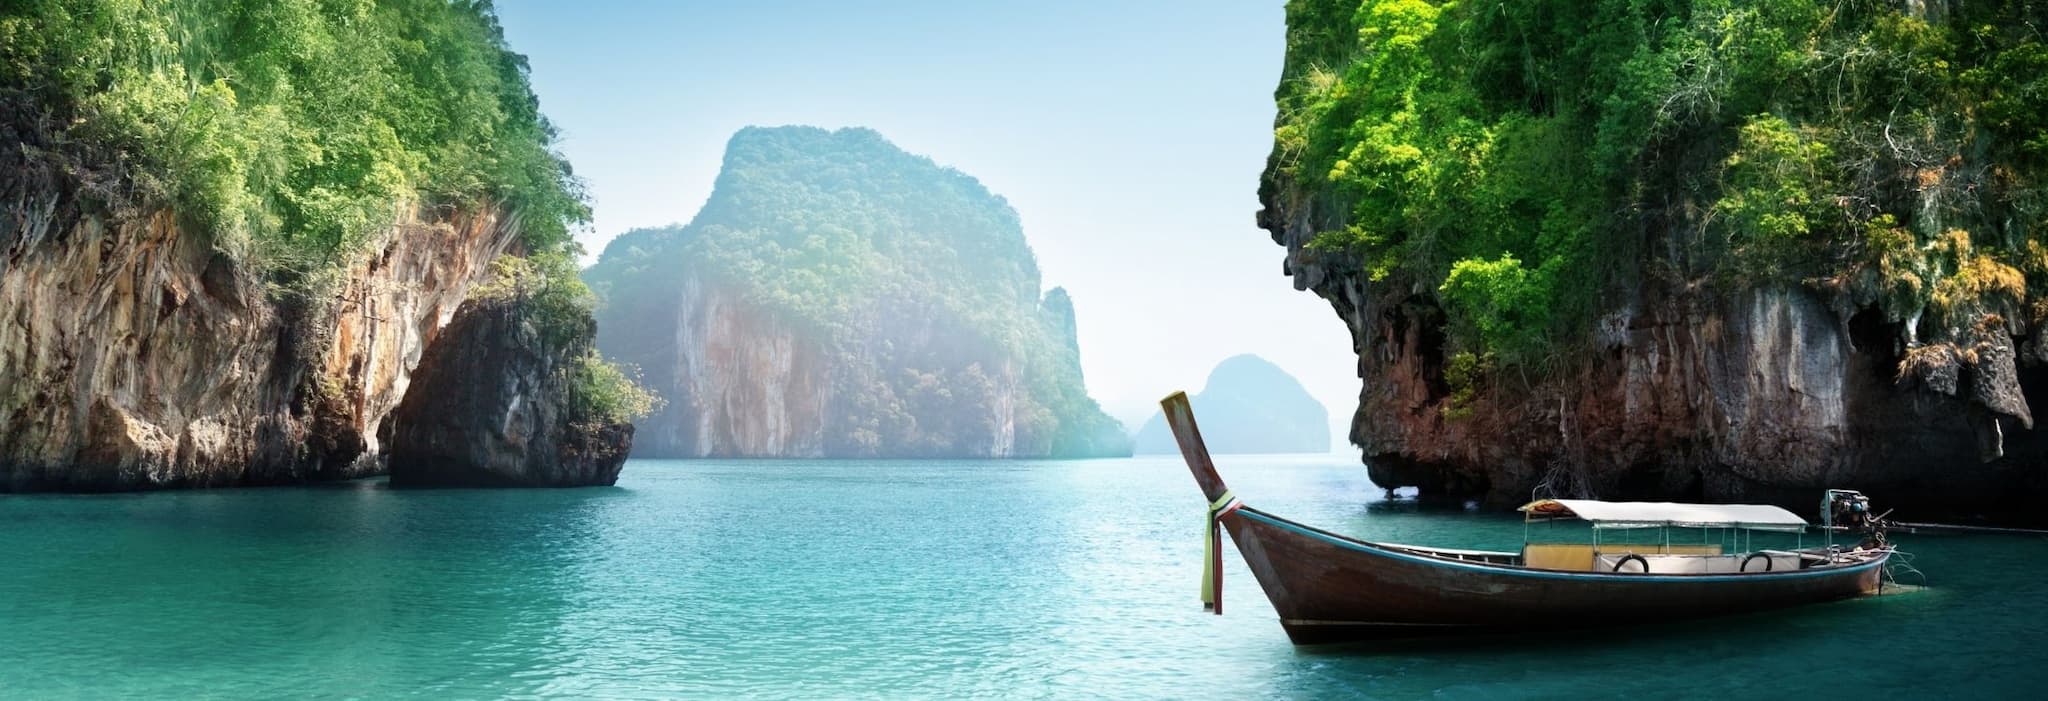 10 Things You Didn't Know About Thailand